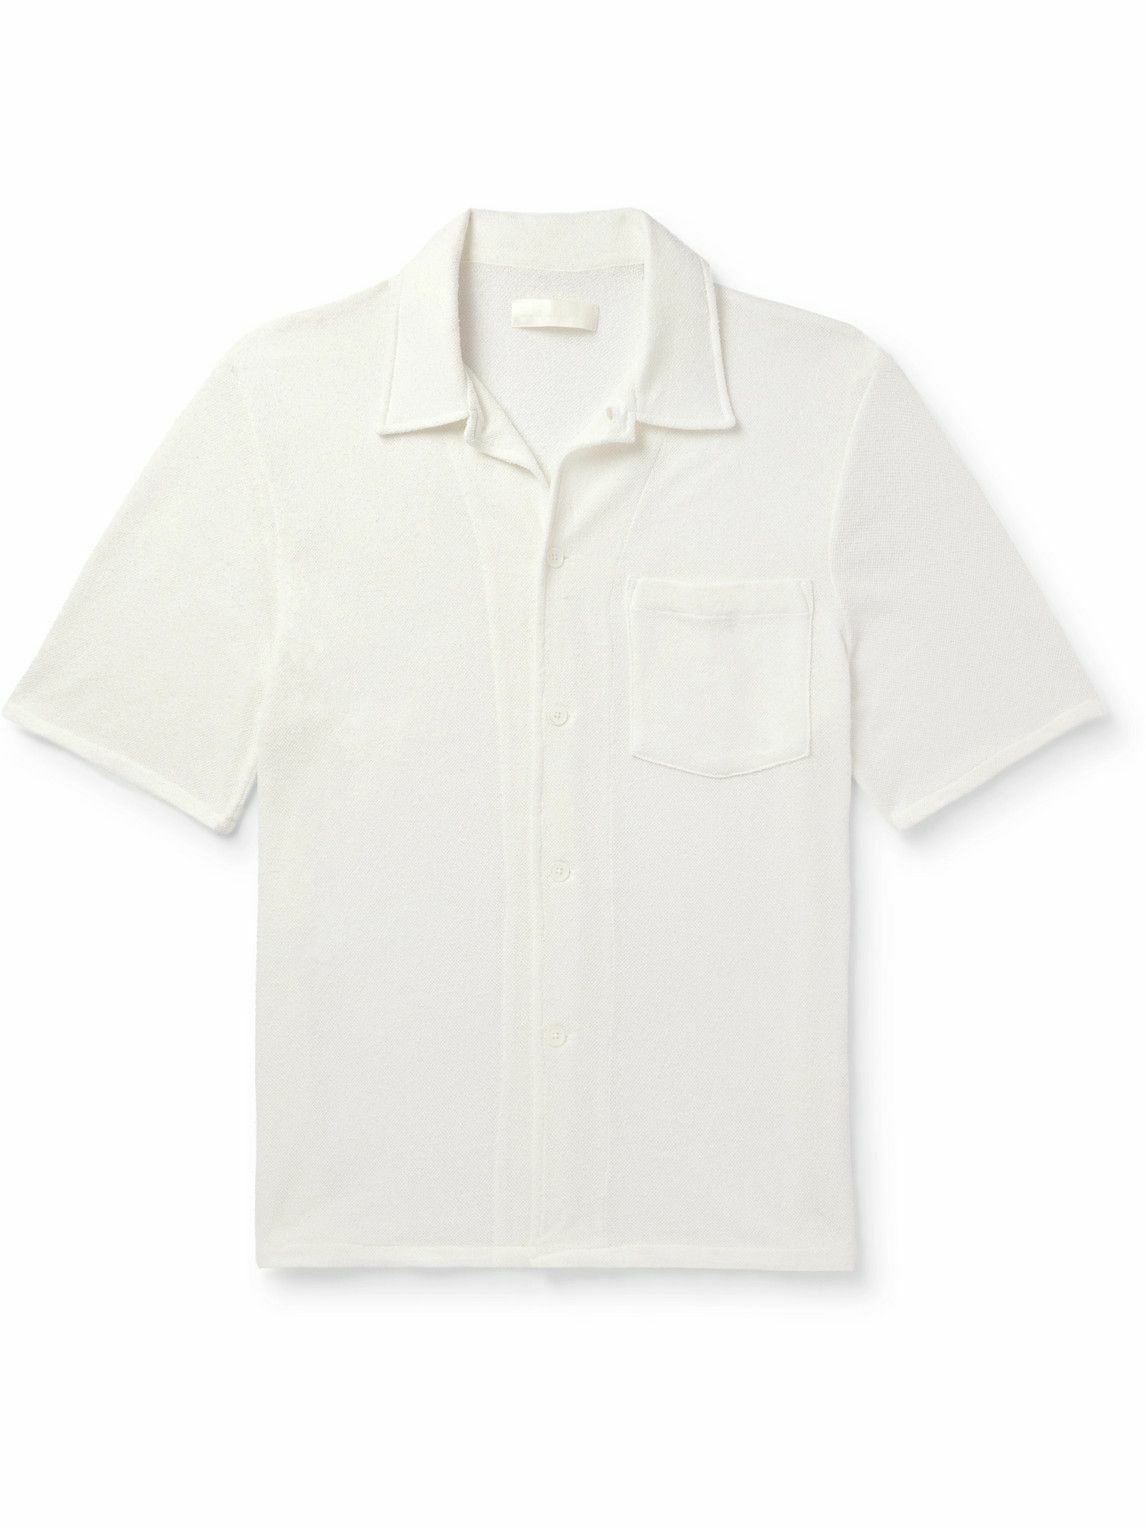 Our Legacy - Woven Shirt - White Our Legacy